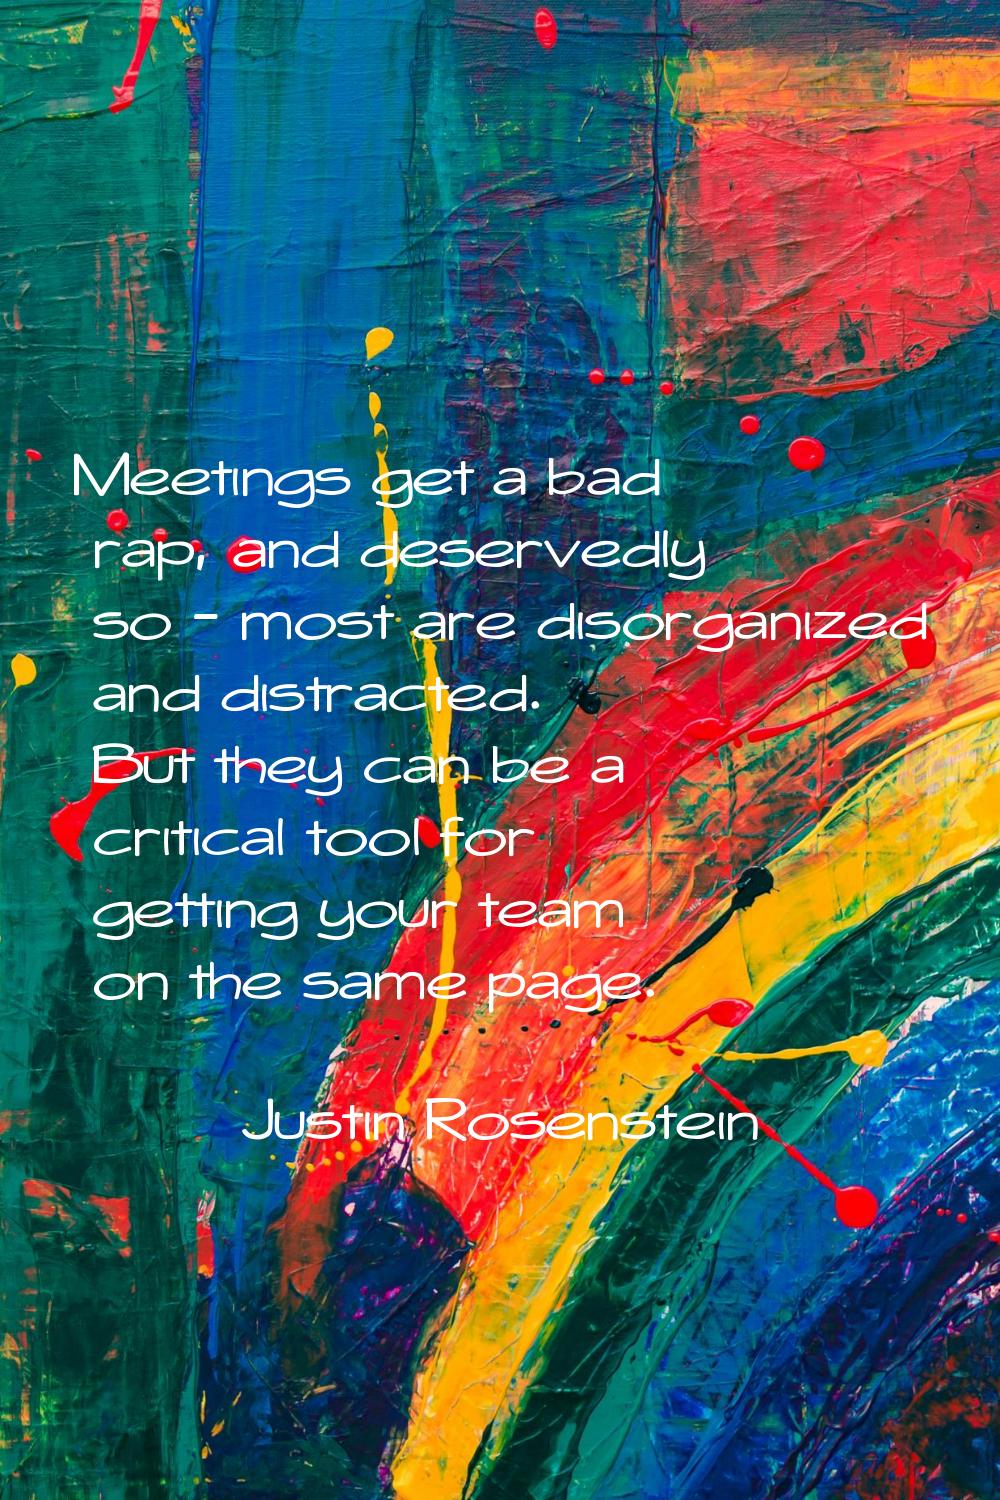 Meetings get a bad rap, and deservedly so - most are disorganized and distracted. But they can be a